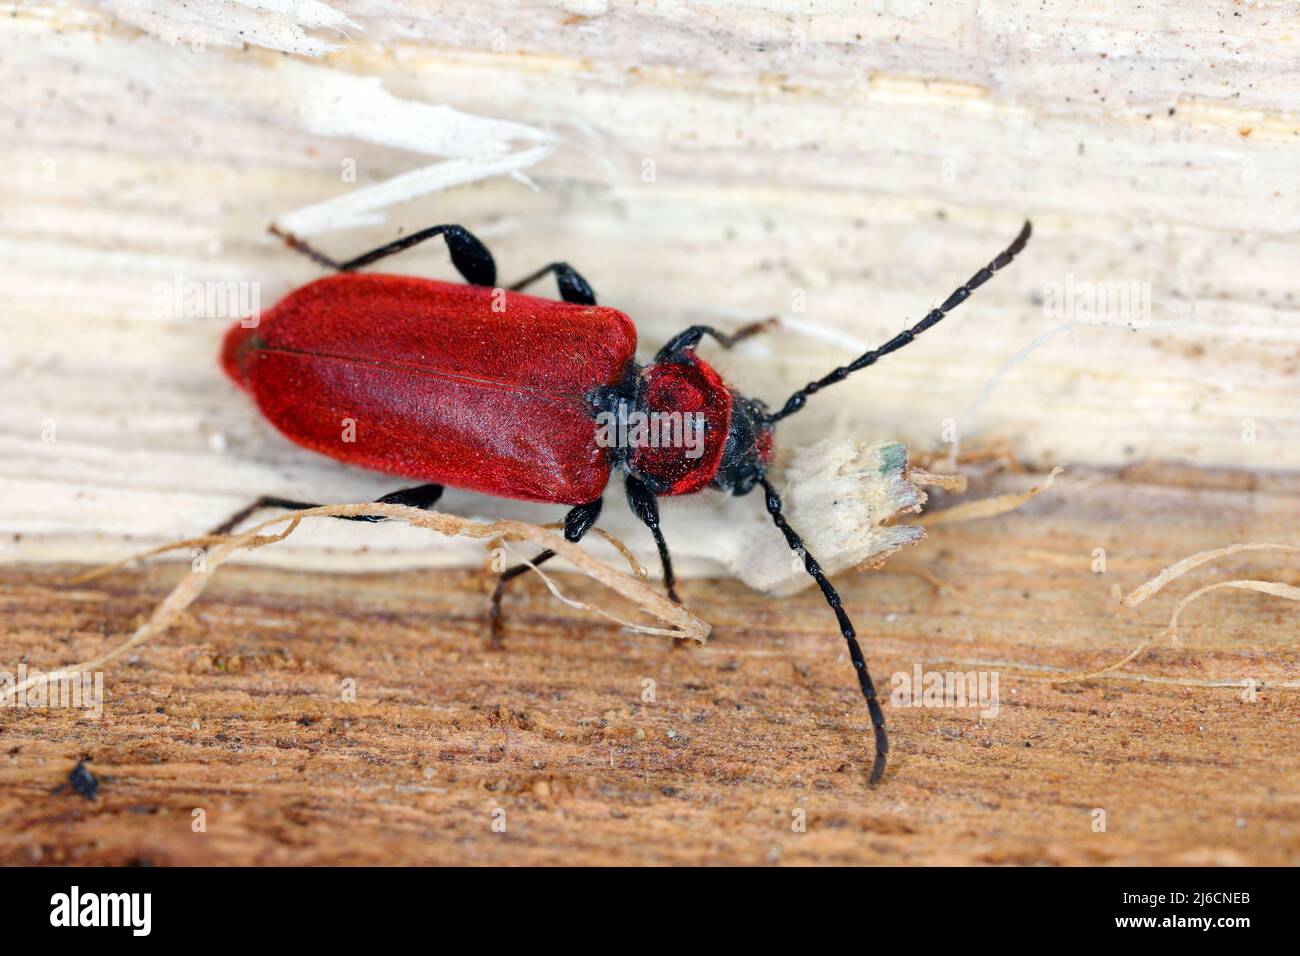 Longhorn beetle - Pyrrhidium sanguineum. This is an insect often found in homes, coming out of firewood. Stock Photo